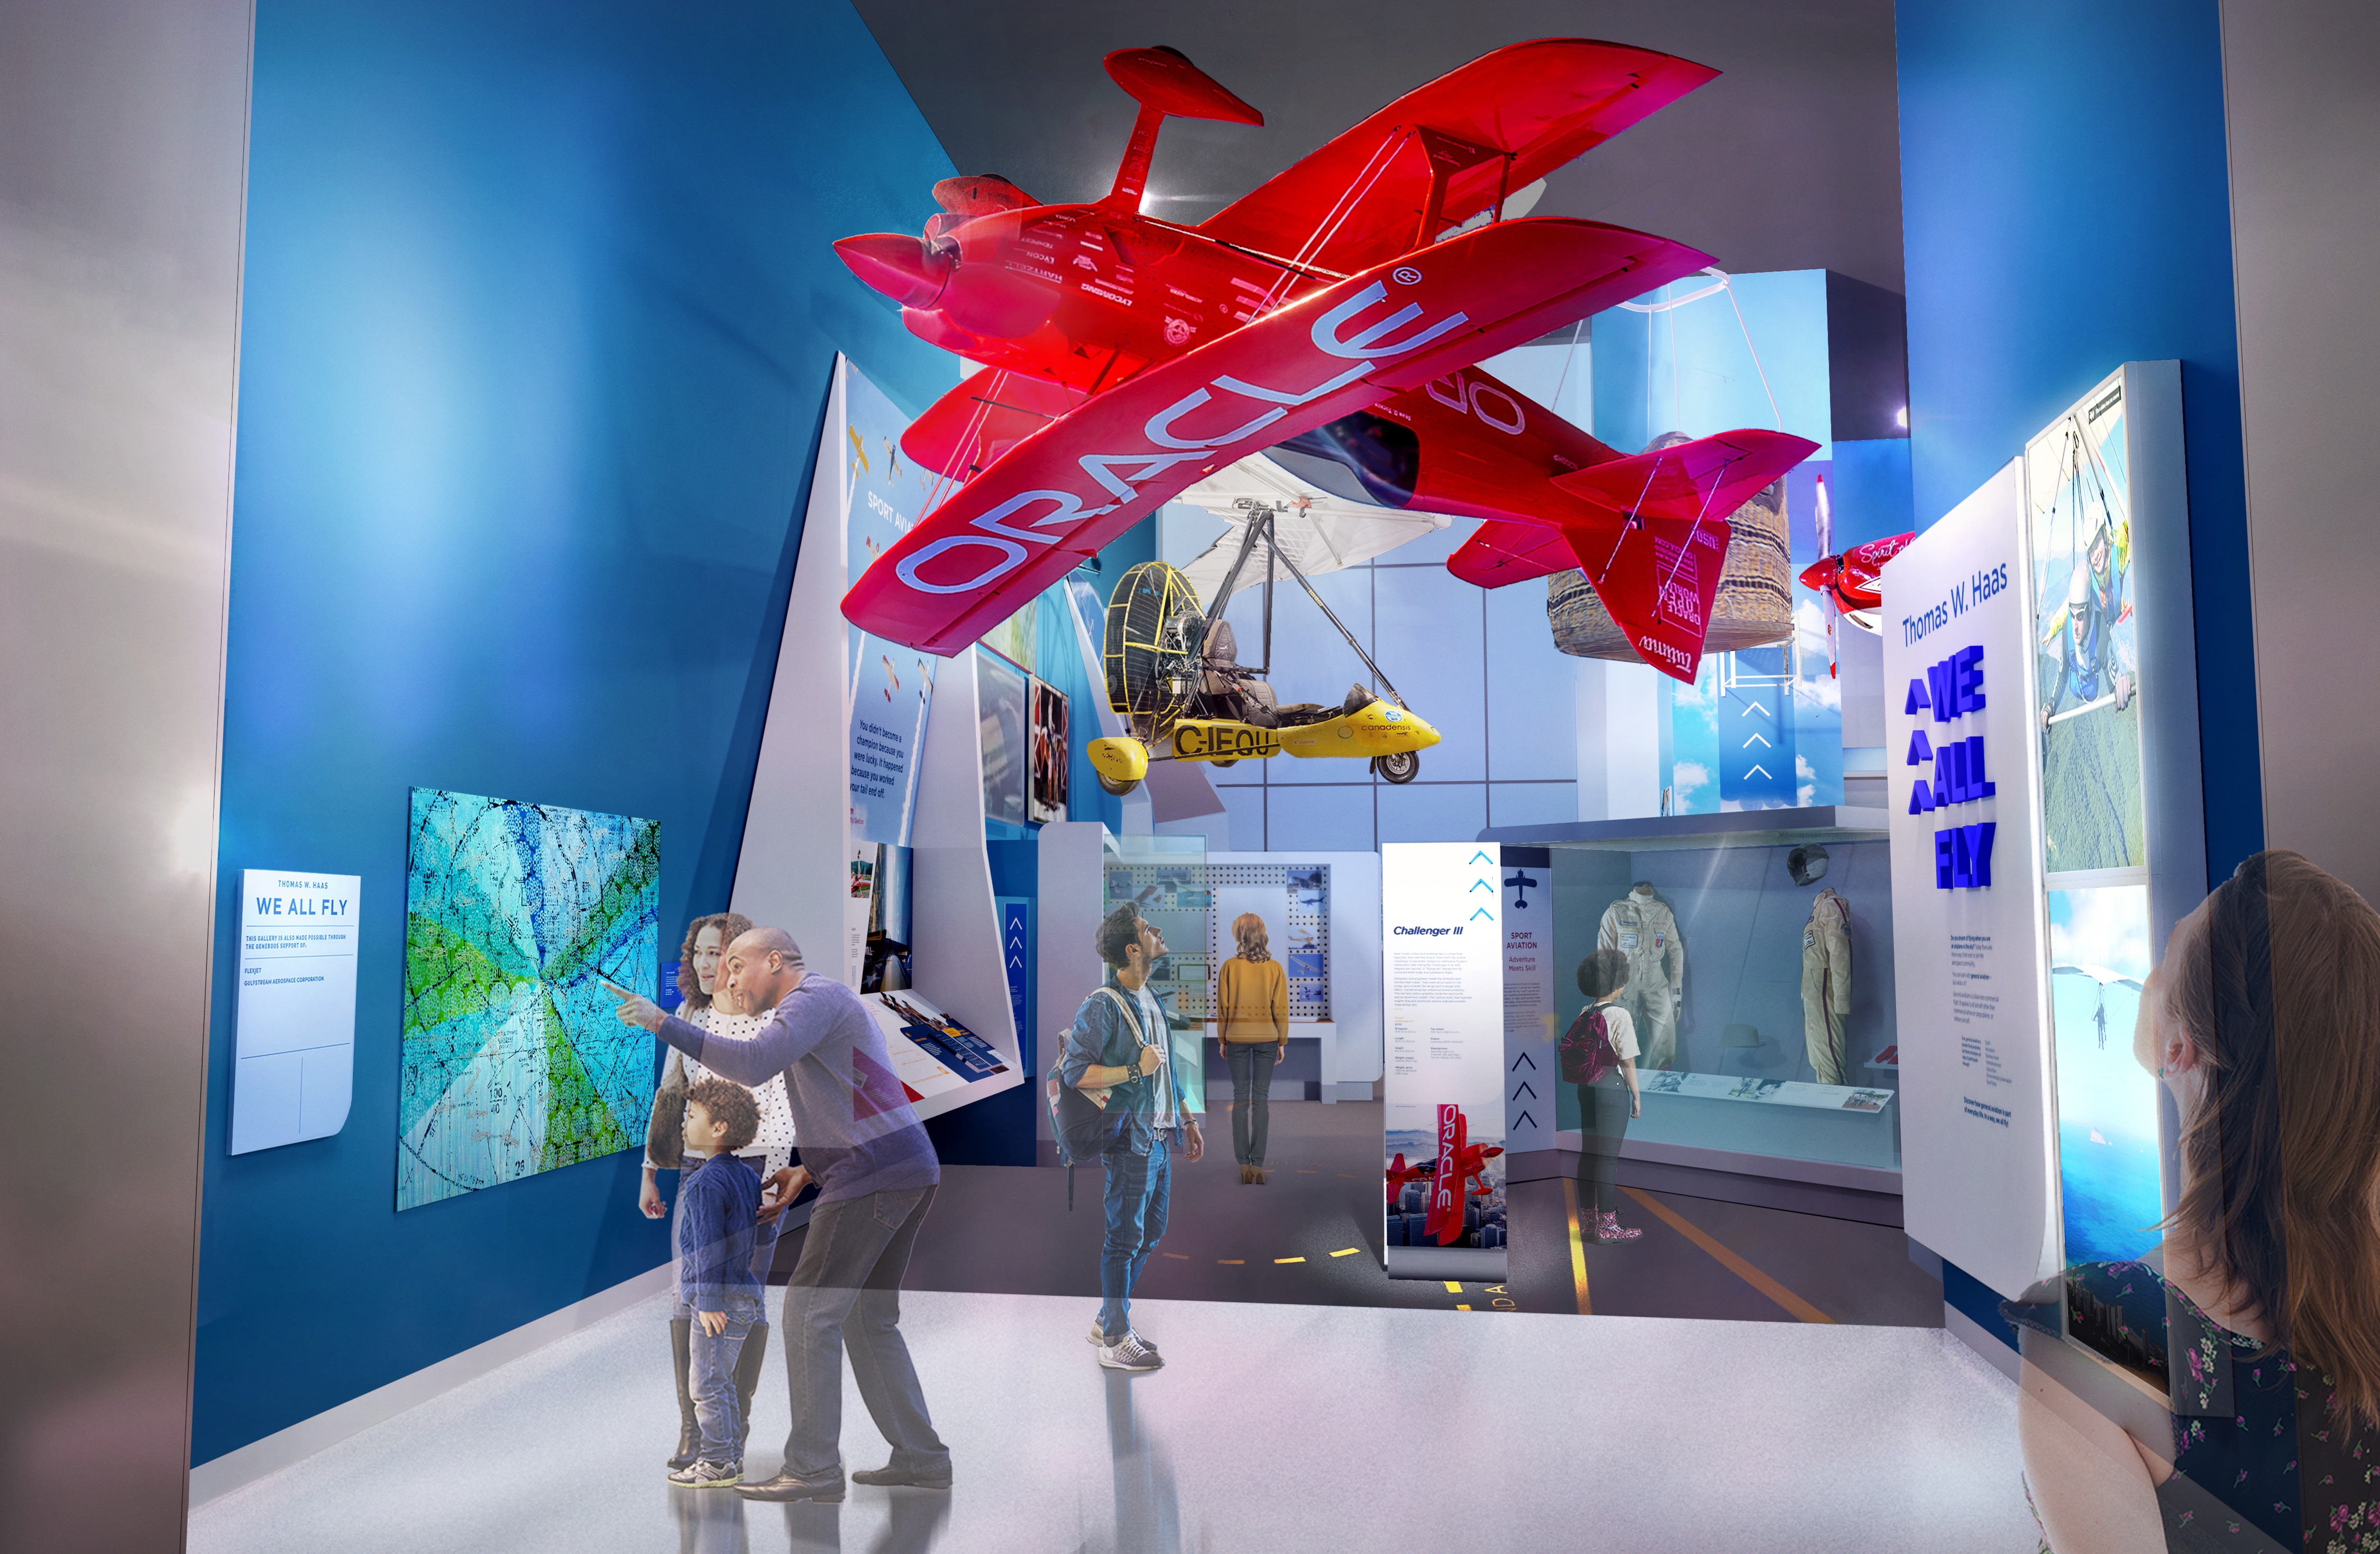 An artist's rendering of a gallery with a plane suspended upside down aloft.